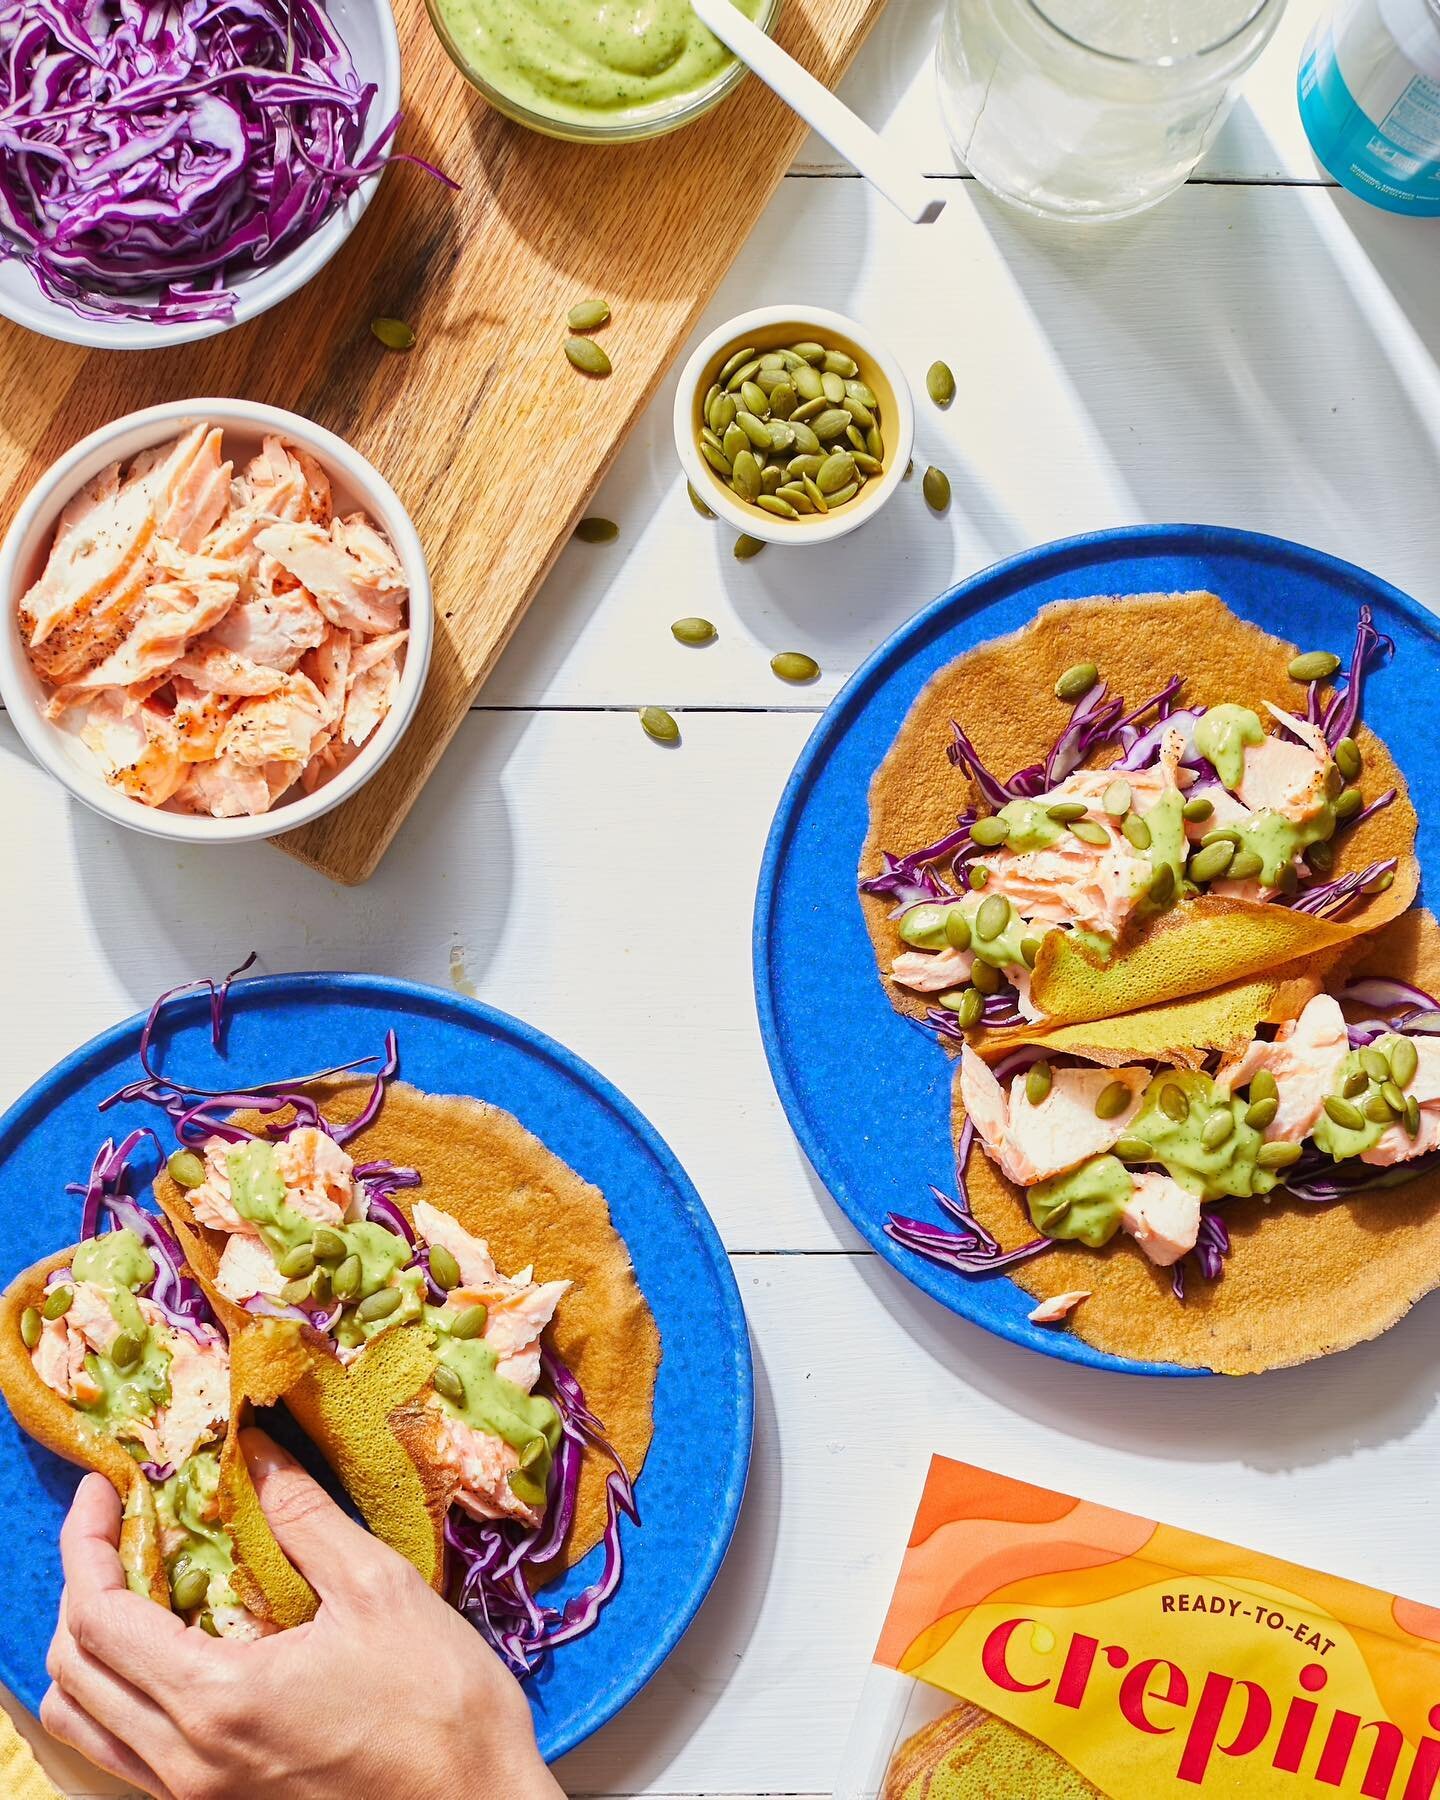 I'm low-key obsessed with these blue plates and the blackened salmon tacos sitting on top of them. 
. 
@Sucreate knocked it out of the park with these!
. 
. 
. 
. 
. 
. 
. 
. 
#setcreativestudios #visualdevelopment #visualcontent #visualcontentcreato